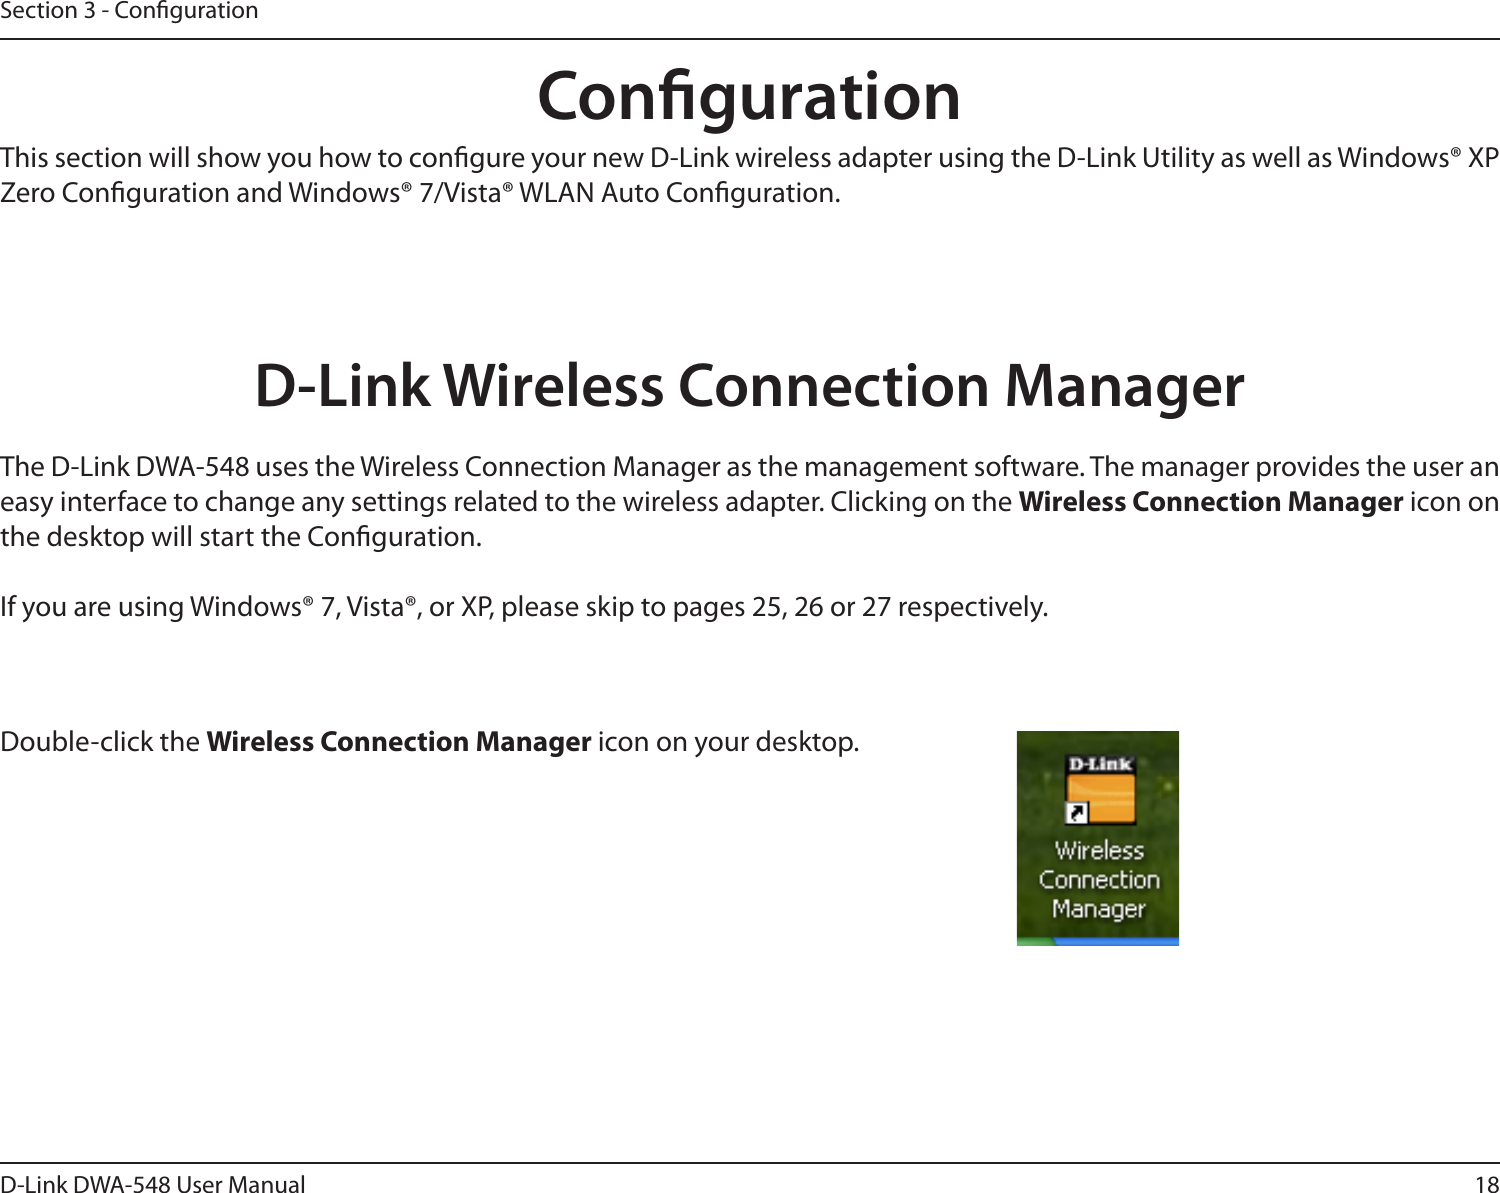 18D-Link DWA-548 User ManualSection 3 - CongurationCongurationD-Link Wireless Connection ManagerThis section will show you how to congure your new D-Link wireless adapter using the D-Link Utility as well as Windows® XP Zero Conguration and Windows® 7/Vista® WLAN Auto Conguration.The D-Link DWA-548 uses the Wireless Connection Manager as the management software. The manager provides the user an easy interface to change any settings related to the wireless adapter. Clicking on the Wireless Connection Manager icon on the desktop will start the Conguration.If you are using Windows® 7, Vista®, or XP, please skip to pages 25, 26 or 27 respectively.Double-click the Wireless Connection Manager icon on your desktop.